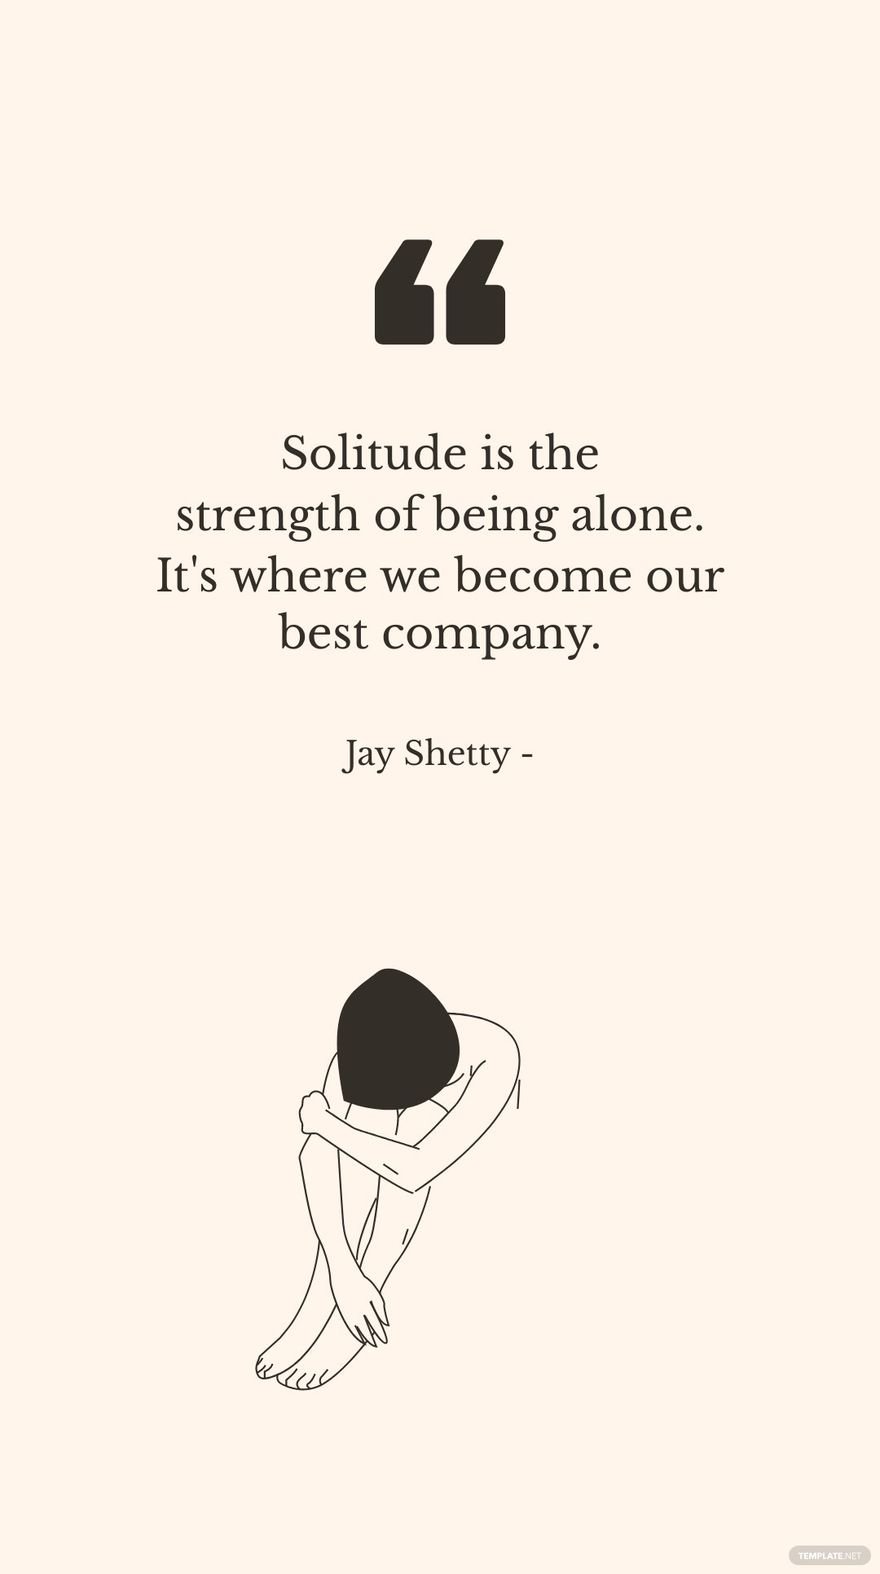 Jay Shetty - Solitude is the strength of being alone. It's where we become our best company. in JPG